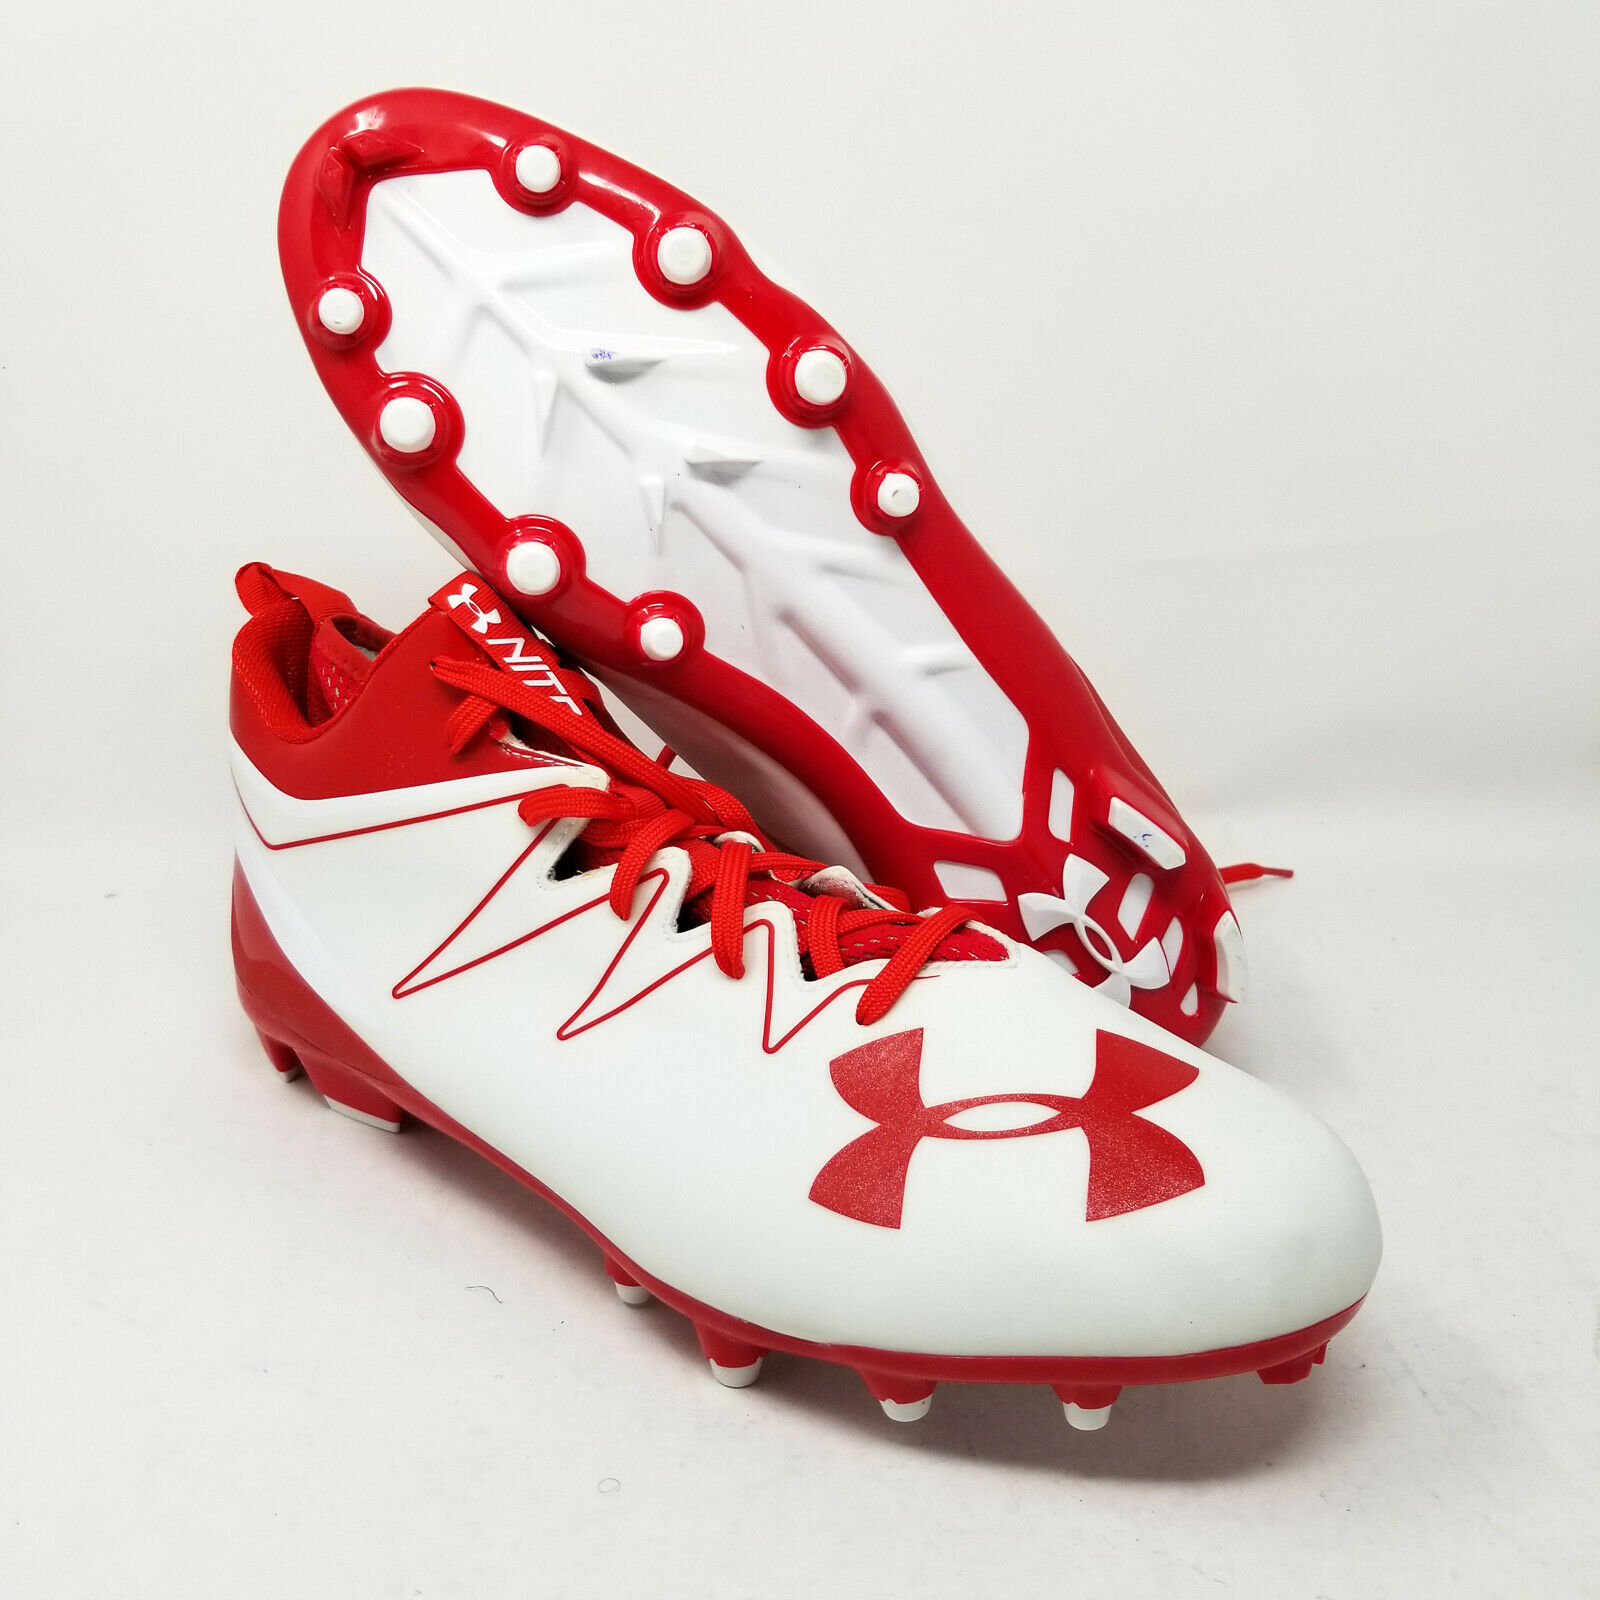 New In Box Under Armour Men's Football Cleats Red & White UA Team Nitro MID MC 